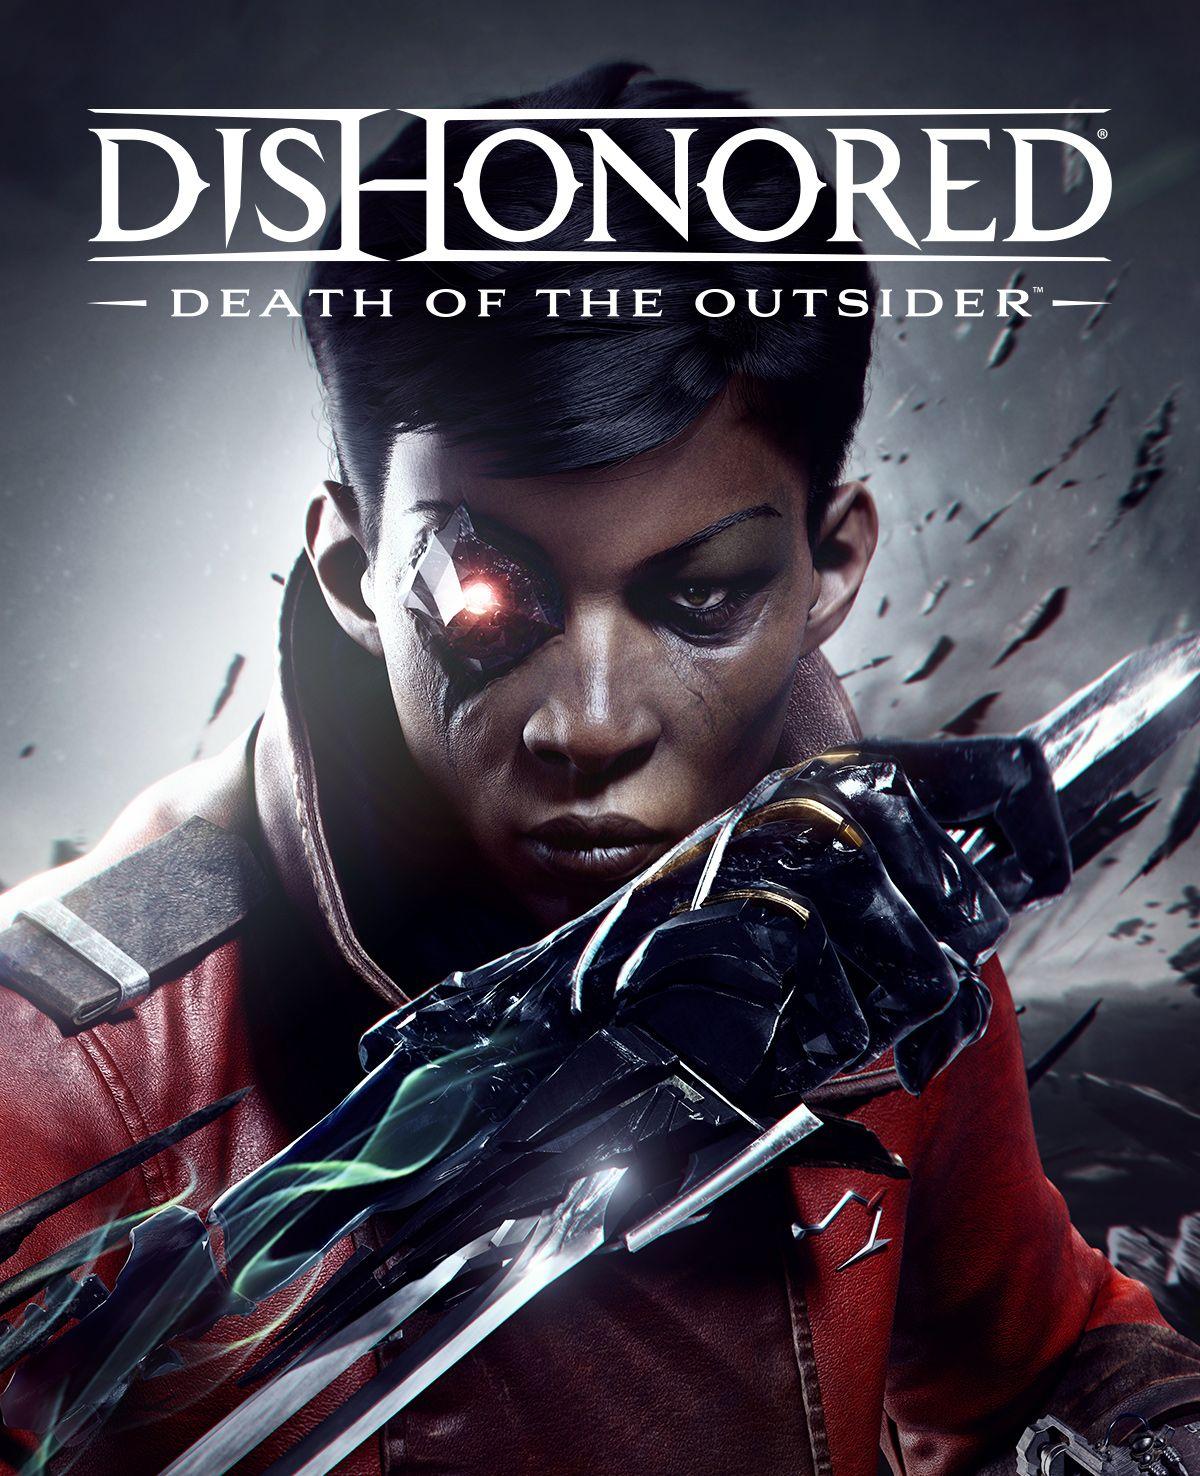 Dishonored: Death of the Outsider Revealed